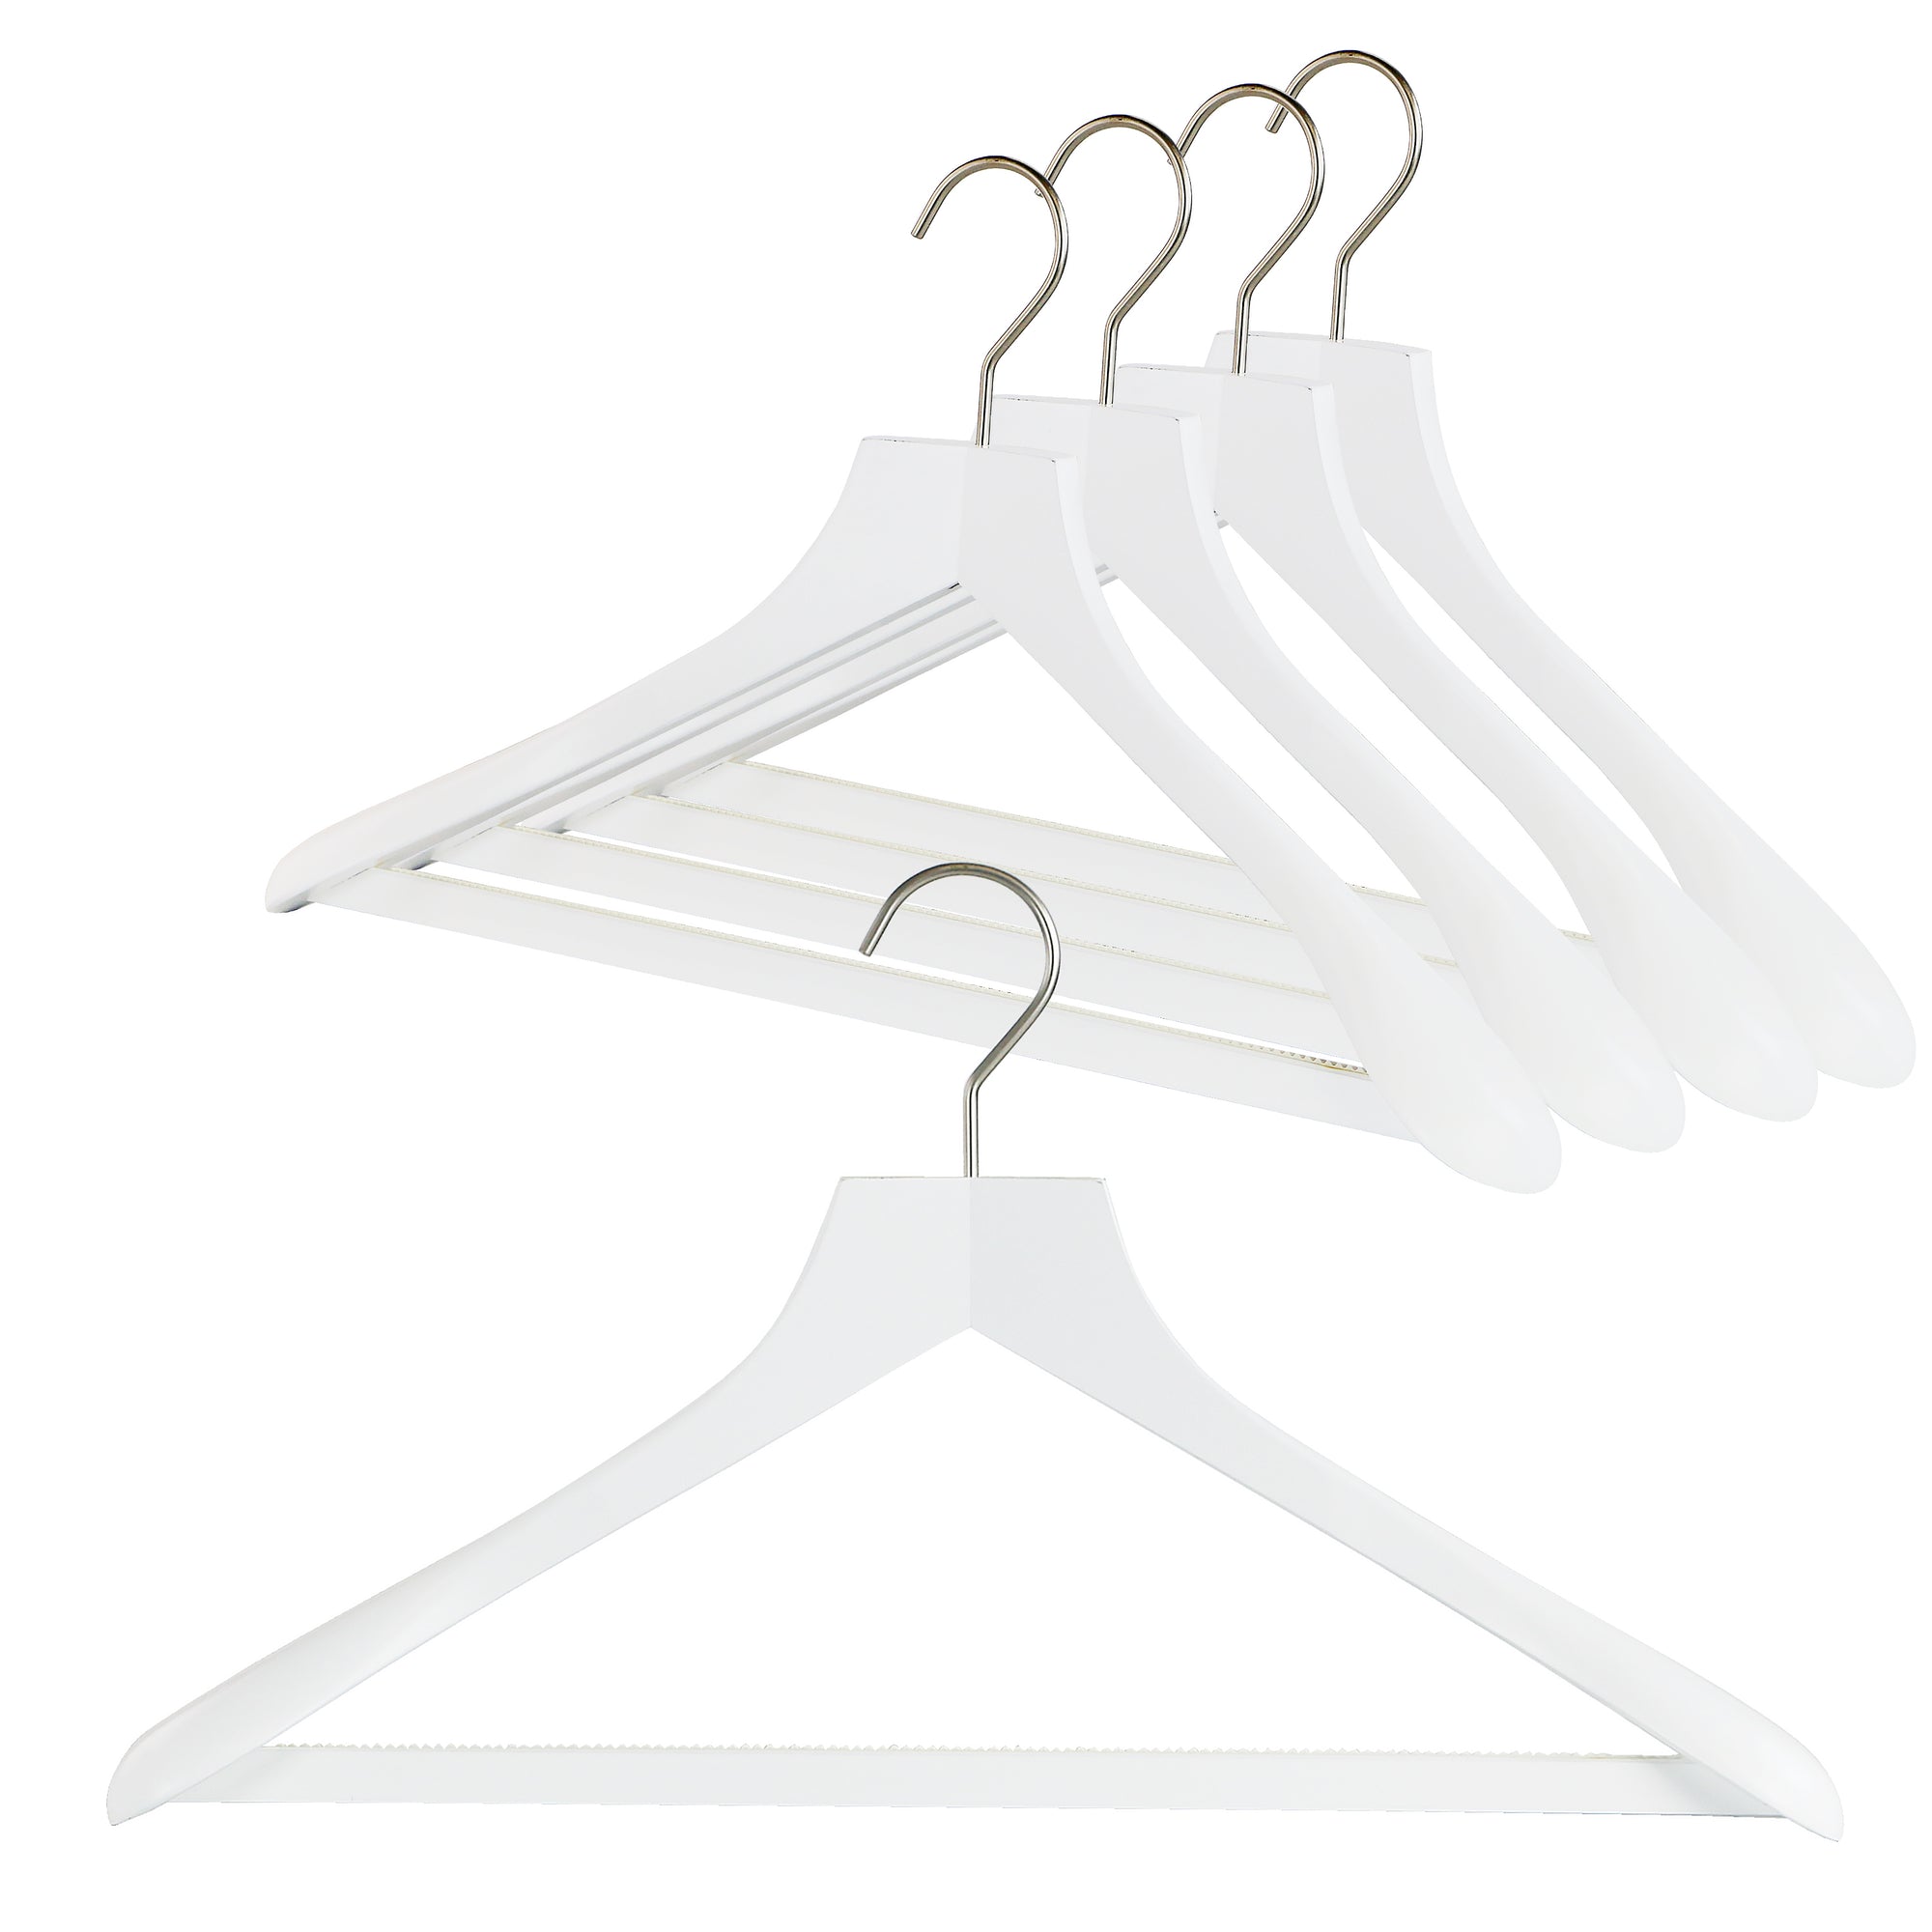 Space Triangles Clothes Rack Pants Triangles Clothes Hanger Hooks